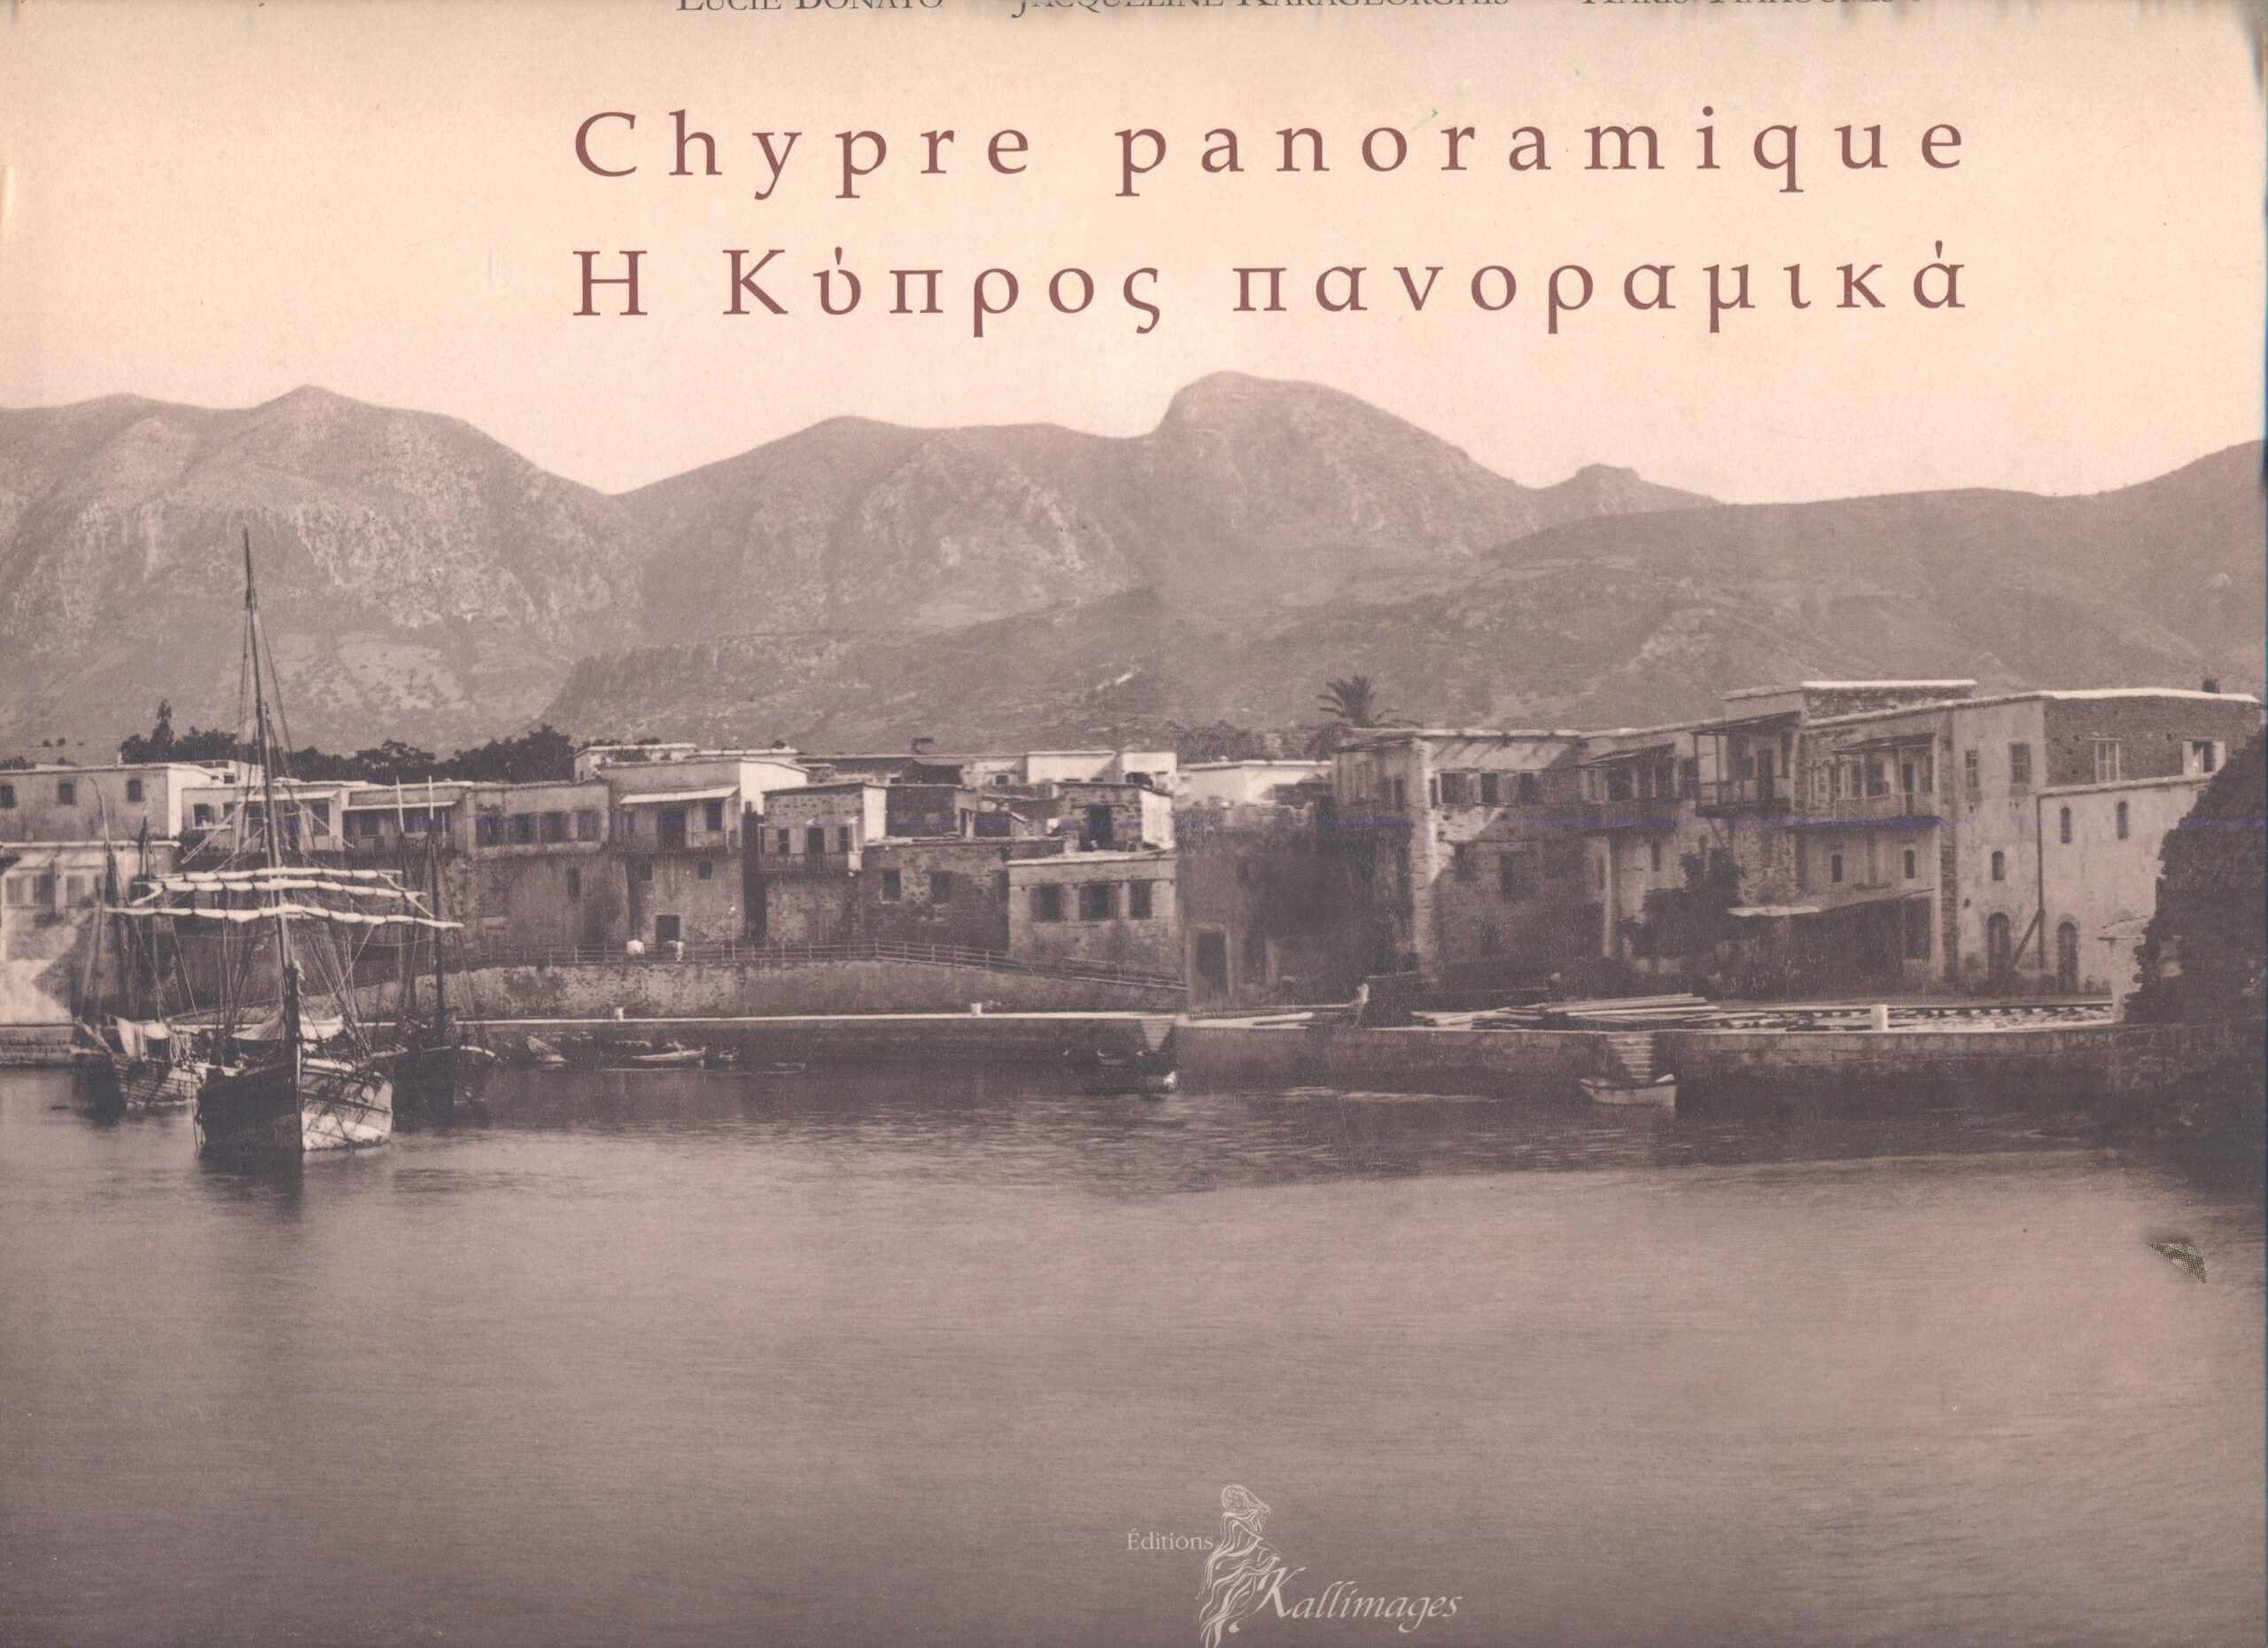 Chypre panoramique Η Κύπρος πανοραμικά